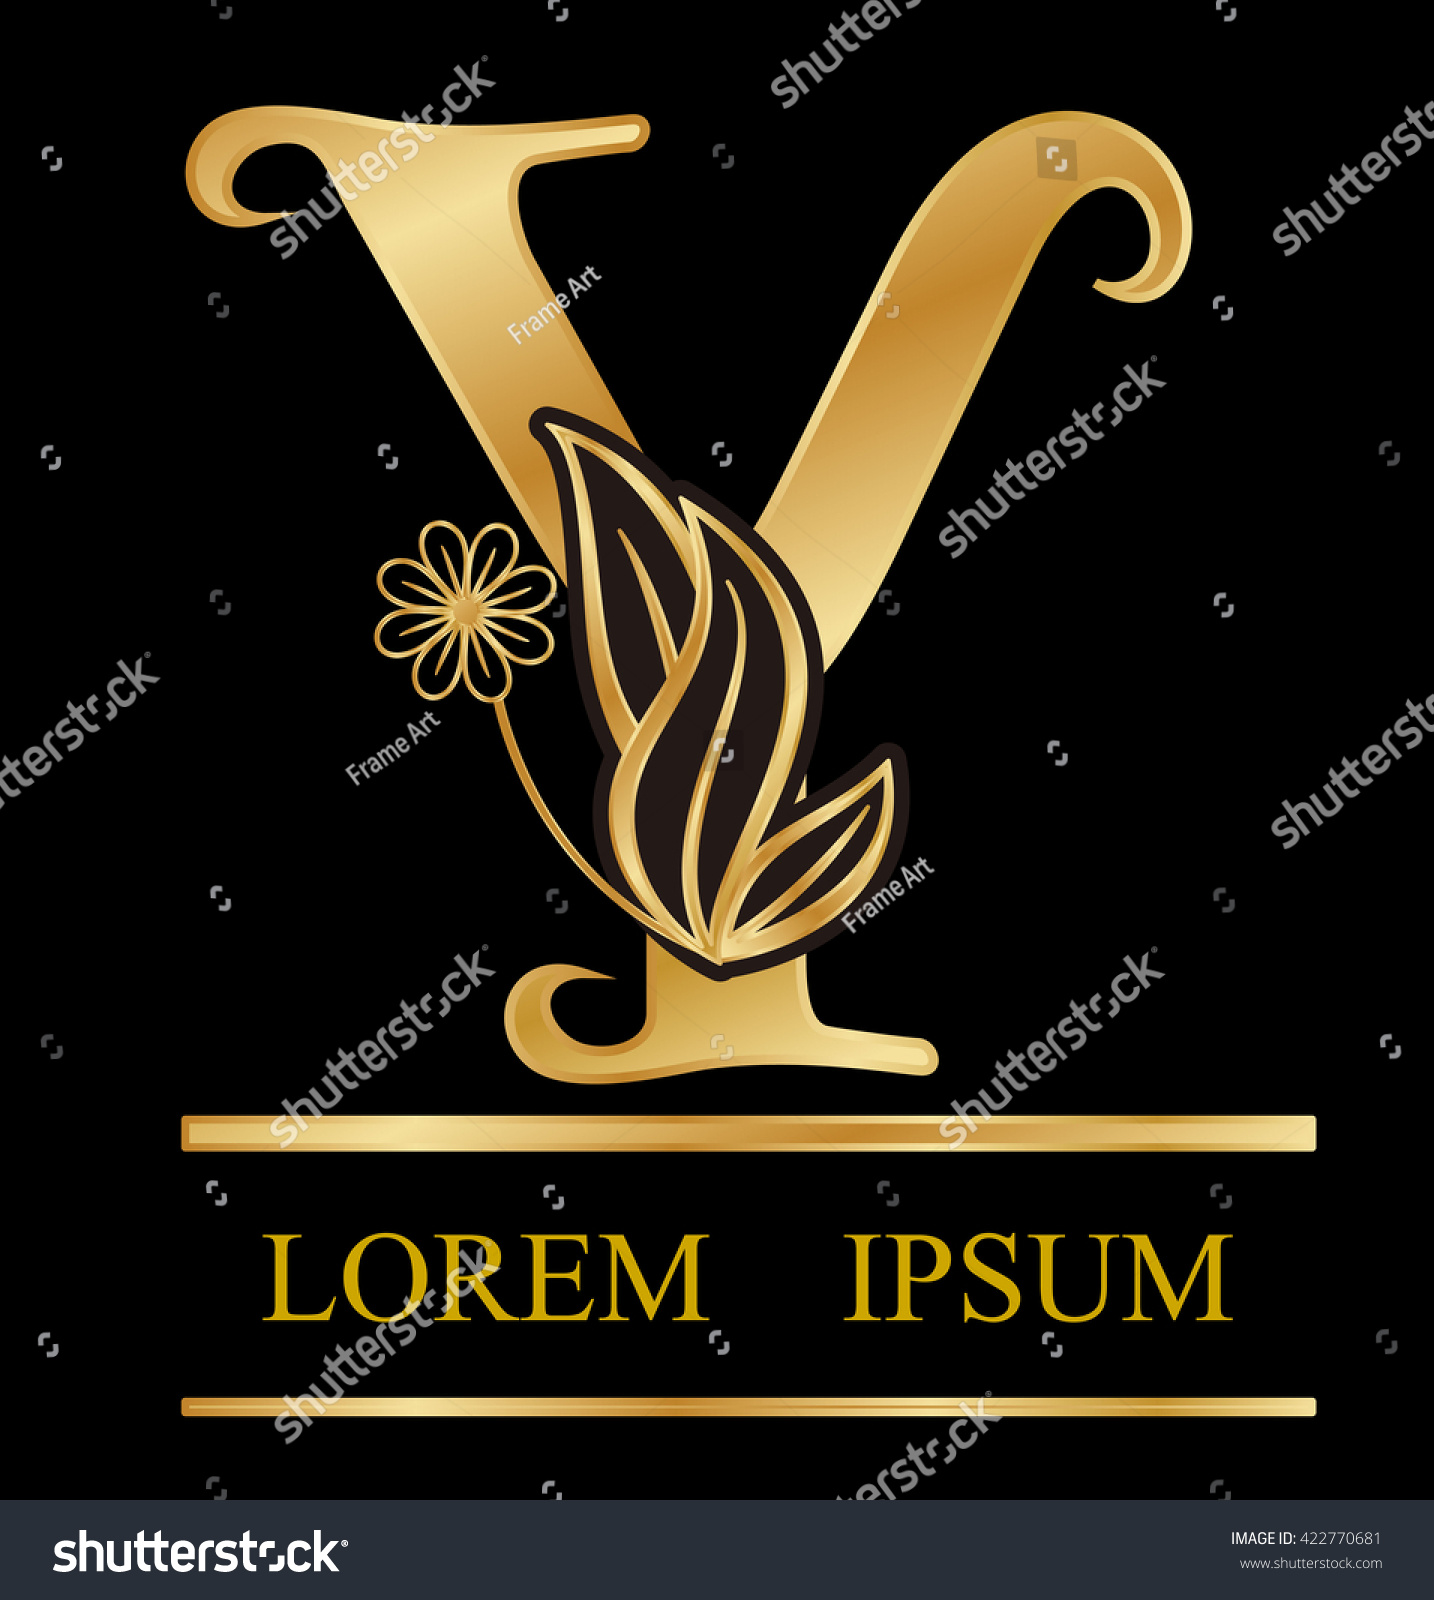 Gold Logo Font Y Type Design Stock Vector Royalty Free 422770681